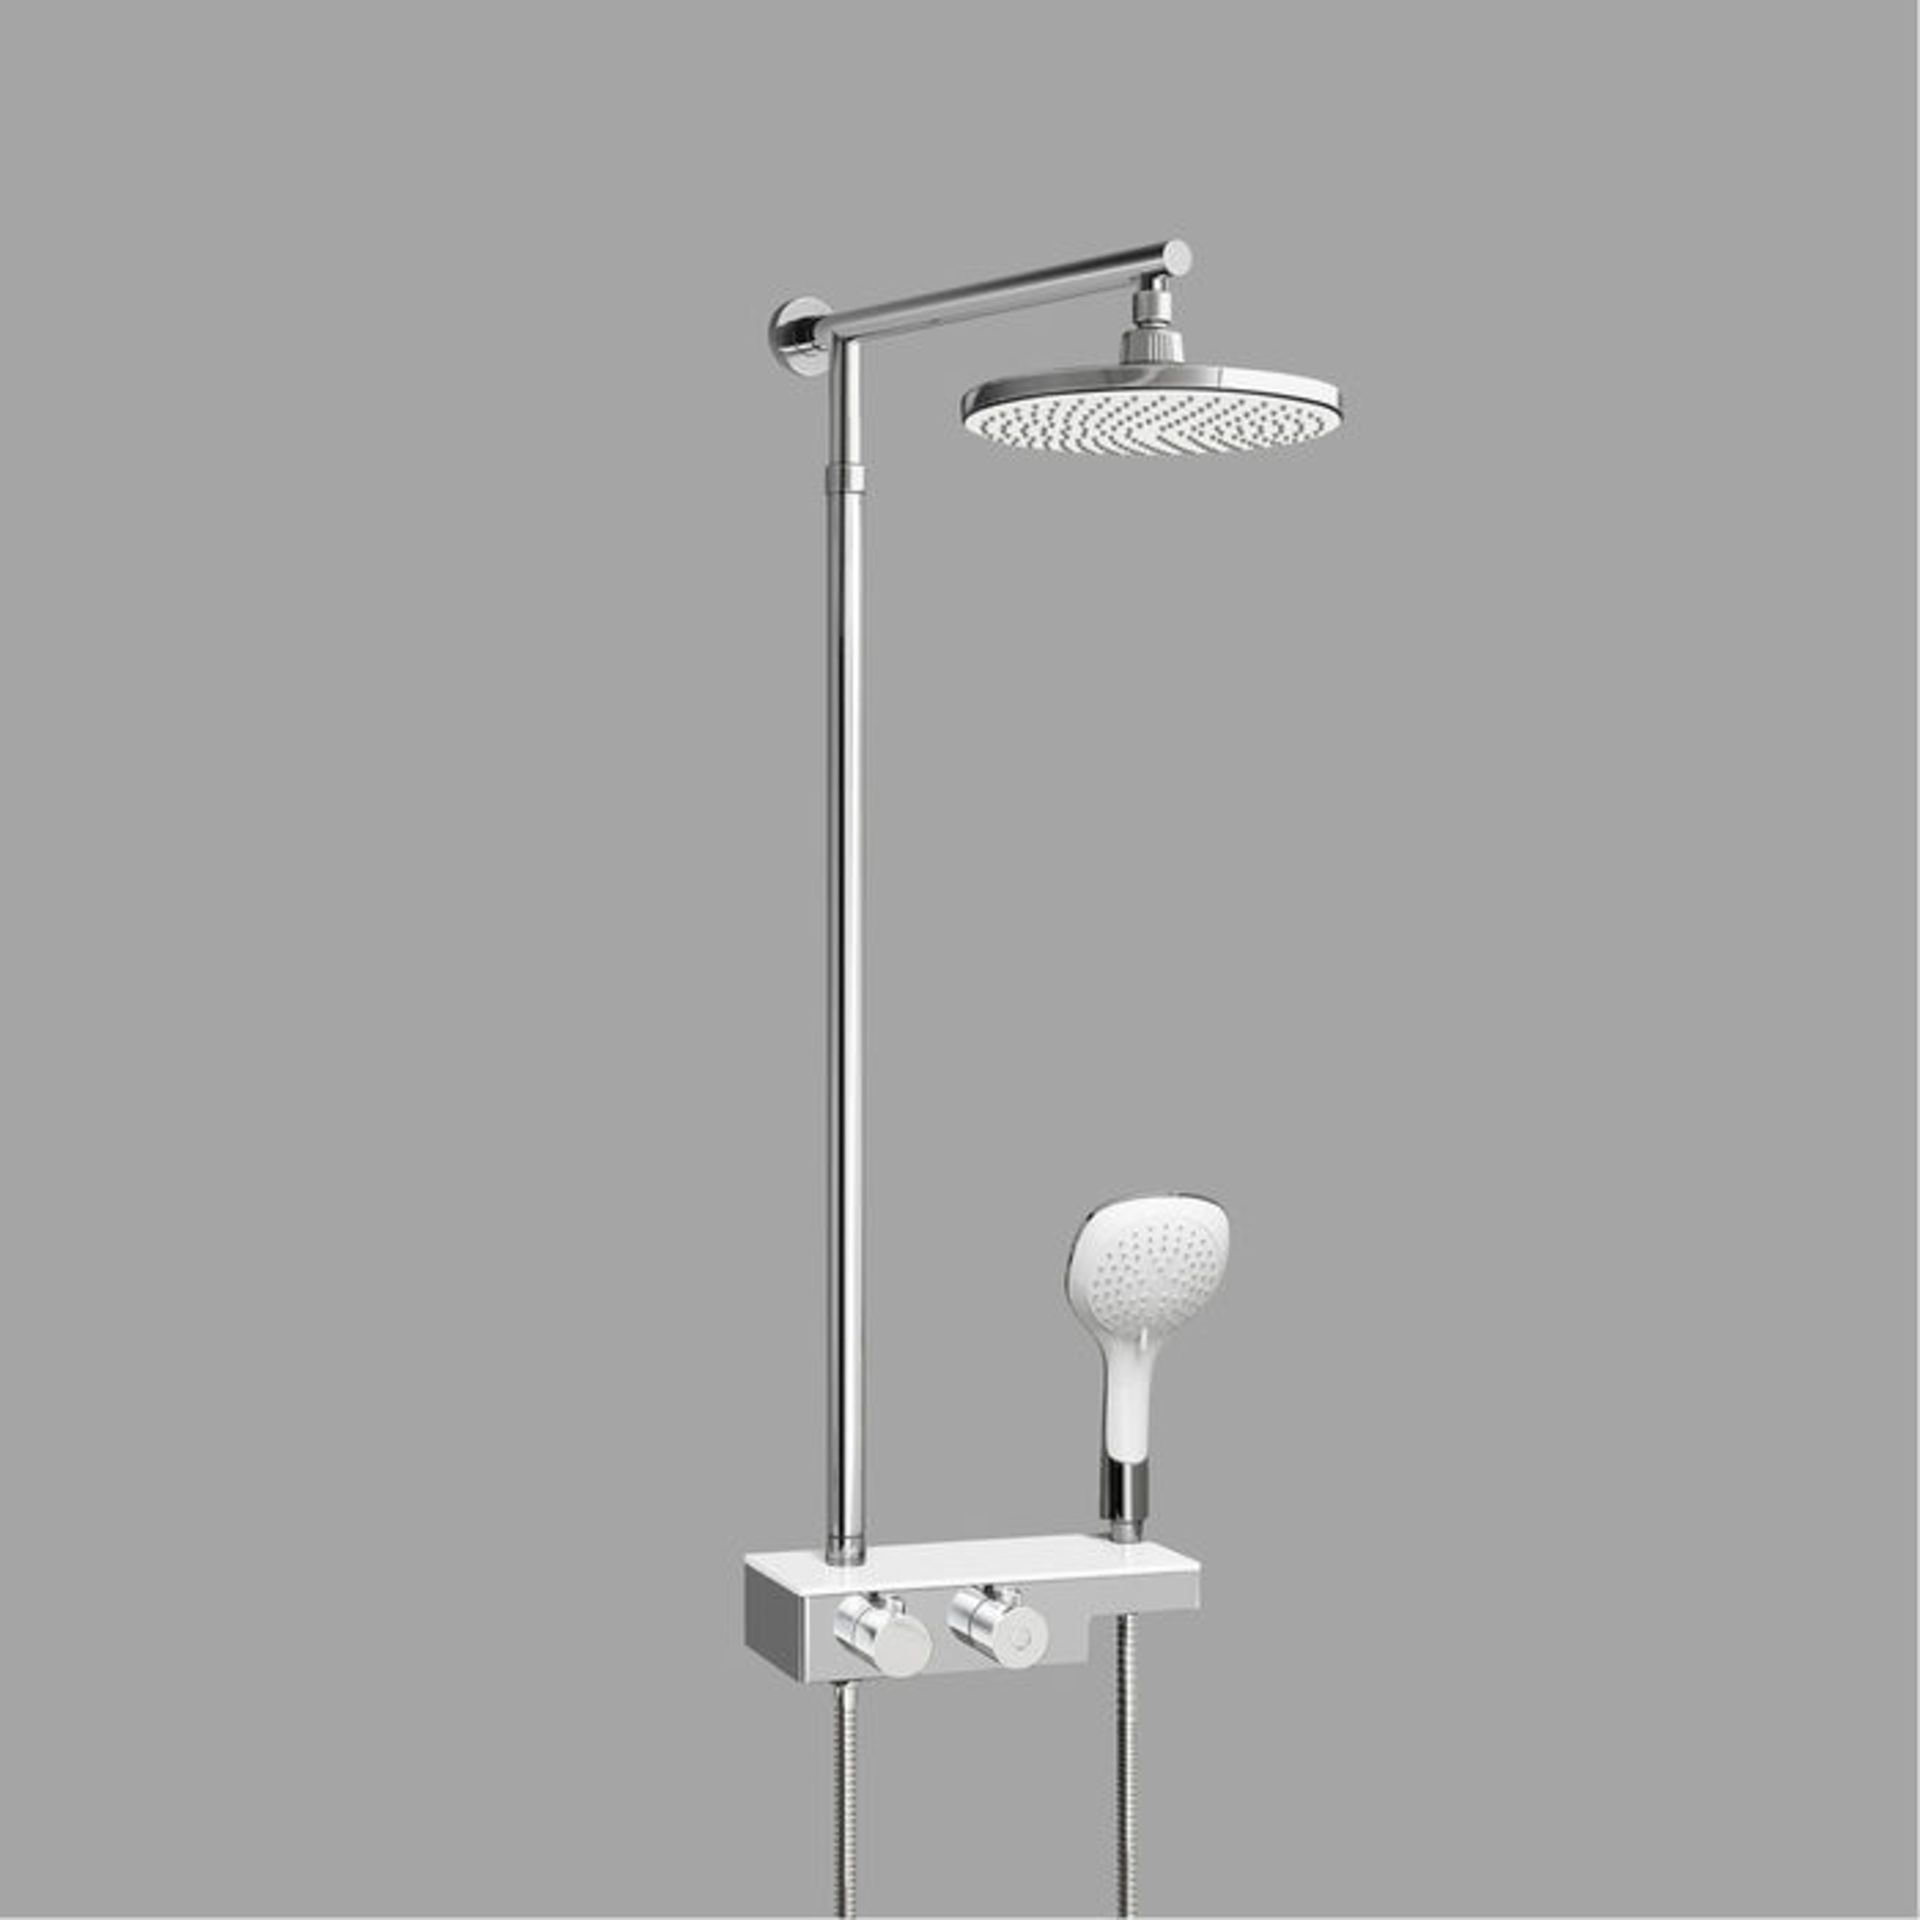 (PO150) Round Exposed Thermostatic Mixer Shower Kit Medium Head & Shelf. Cool to touch shower for - Image 2 of 2